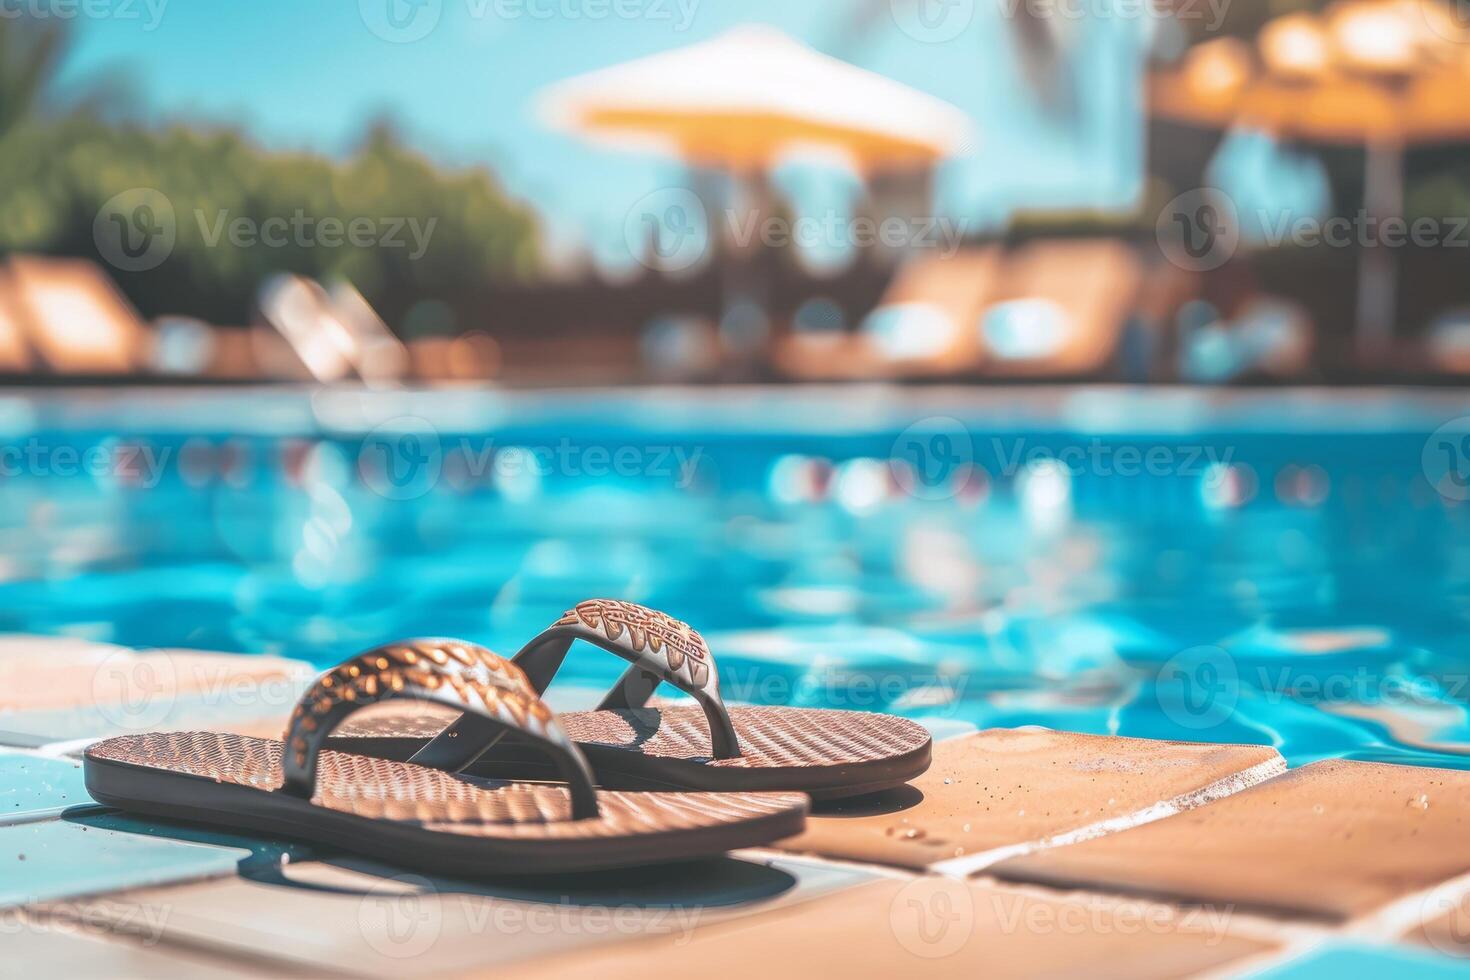 Pair of flip-flops left at the edge of pool, signaling carefree summer day photo